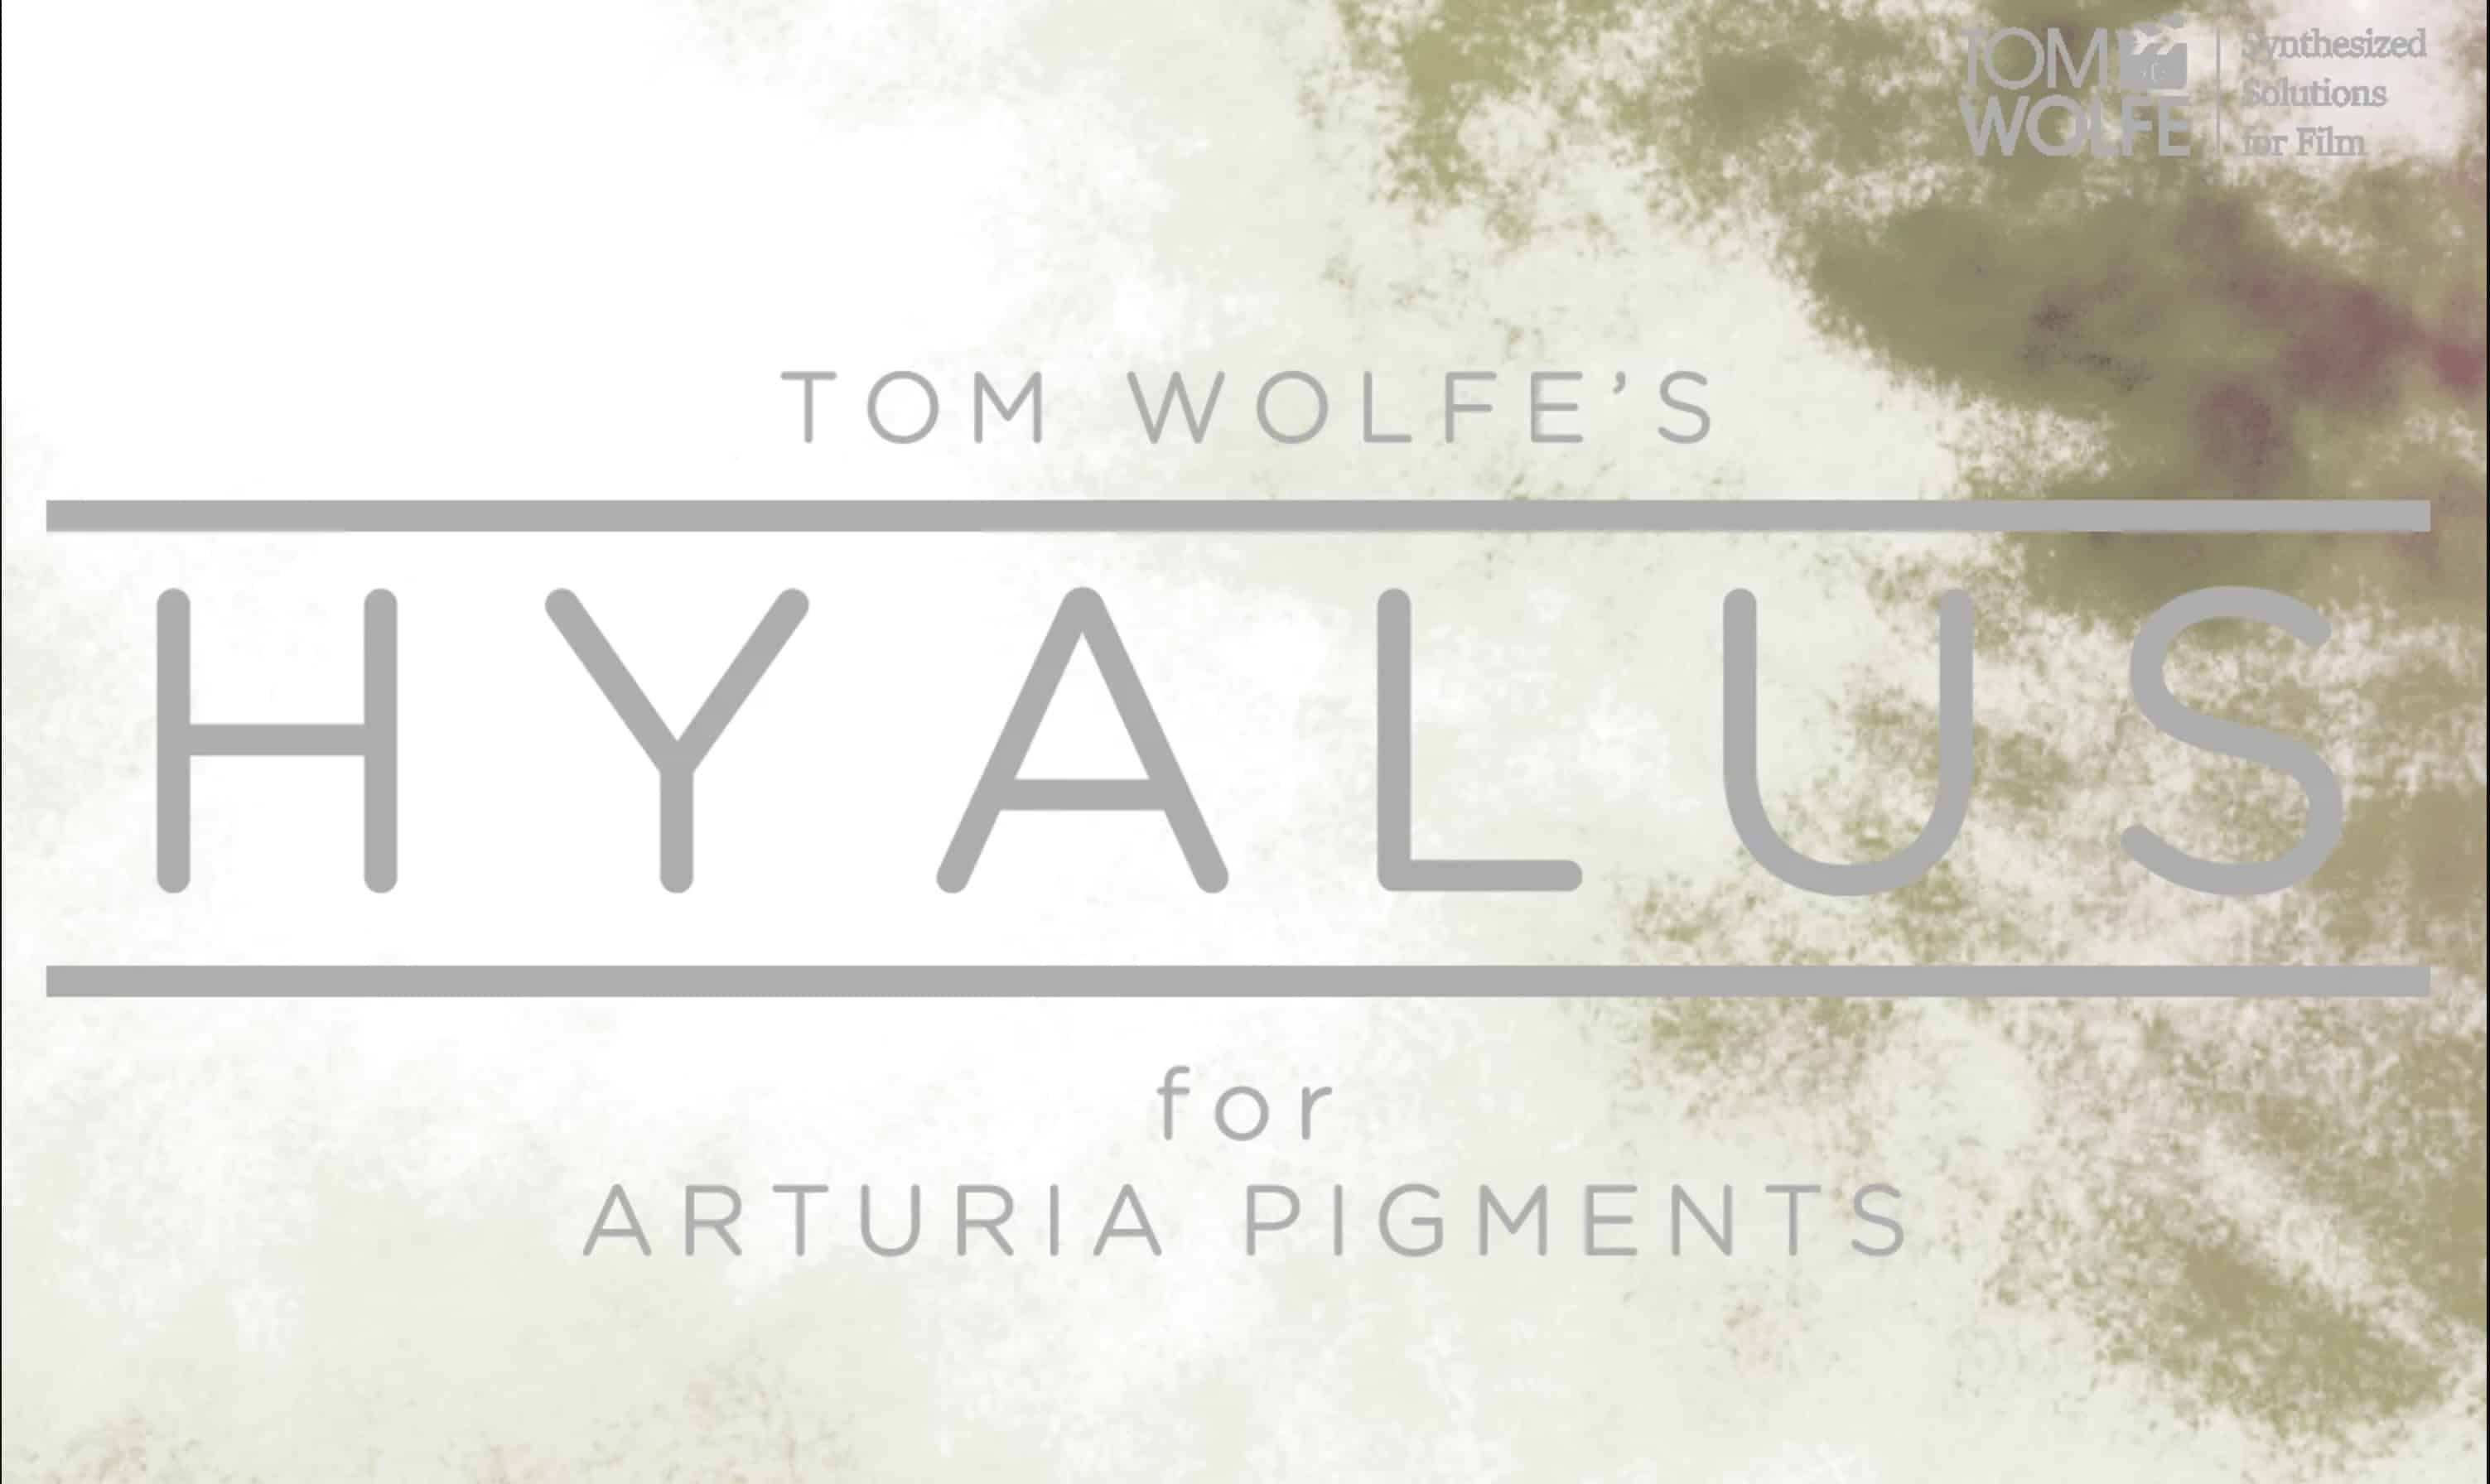 Hyalus Pigments - 100 Glassy, Ambient-style Patches For Arturia Pigments